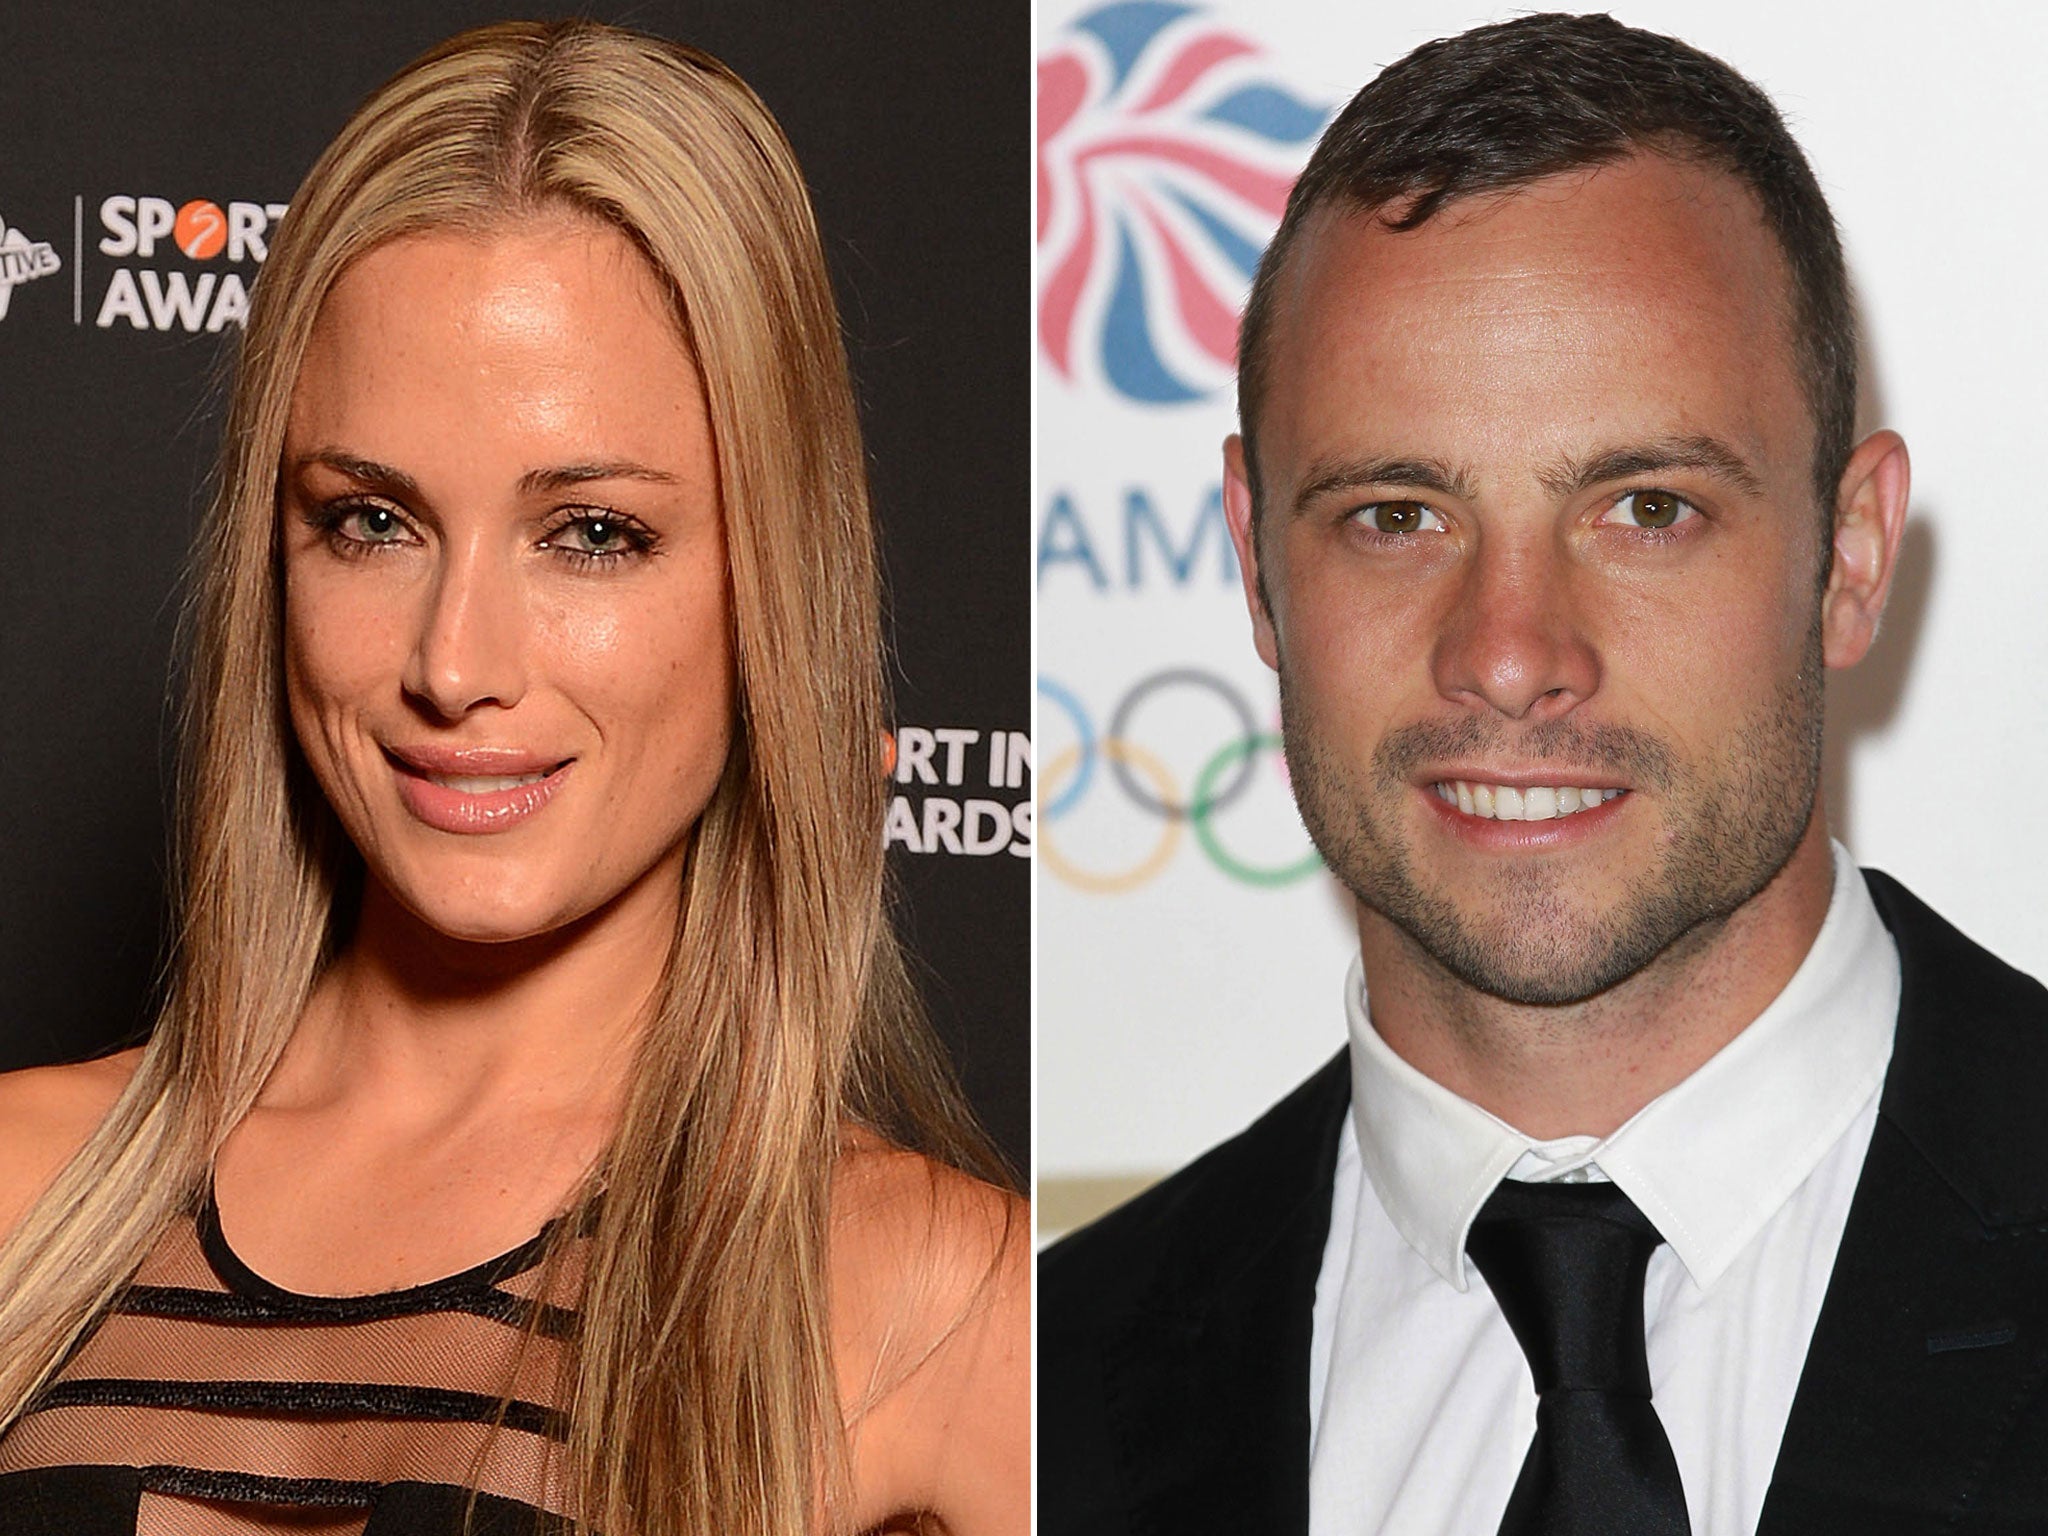 South African model Reeva Steenkamp (left), and her former boyfriend Oscar Pistorius, who stands accused of her murder